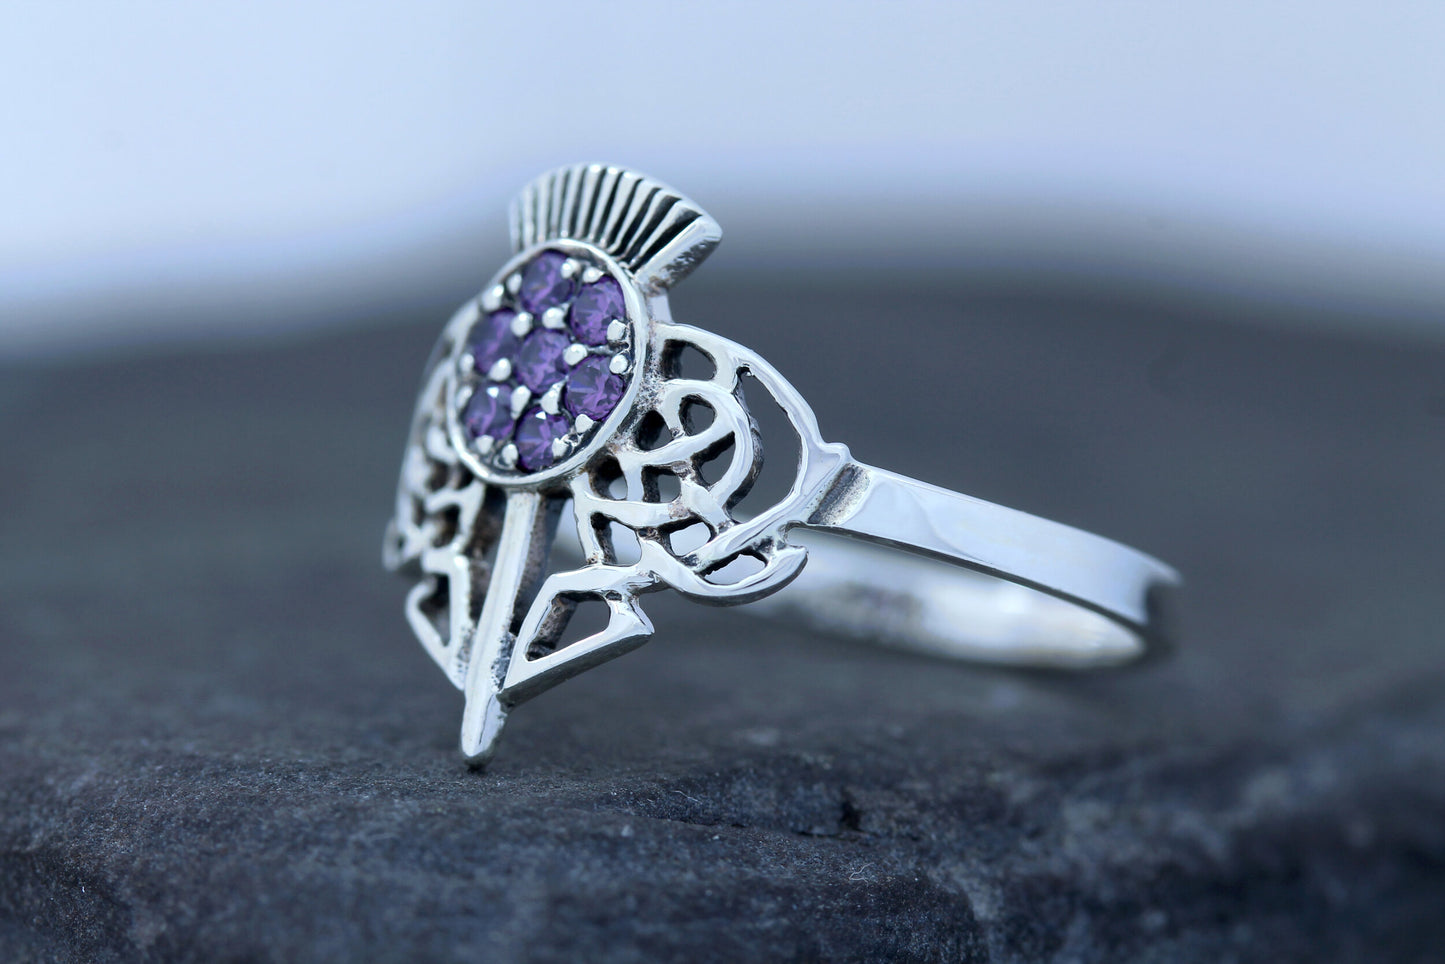 Scottish Thistle Ring - Jewelled Crown with Celtic Knot Leaves